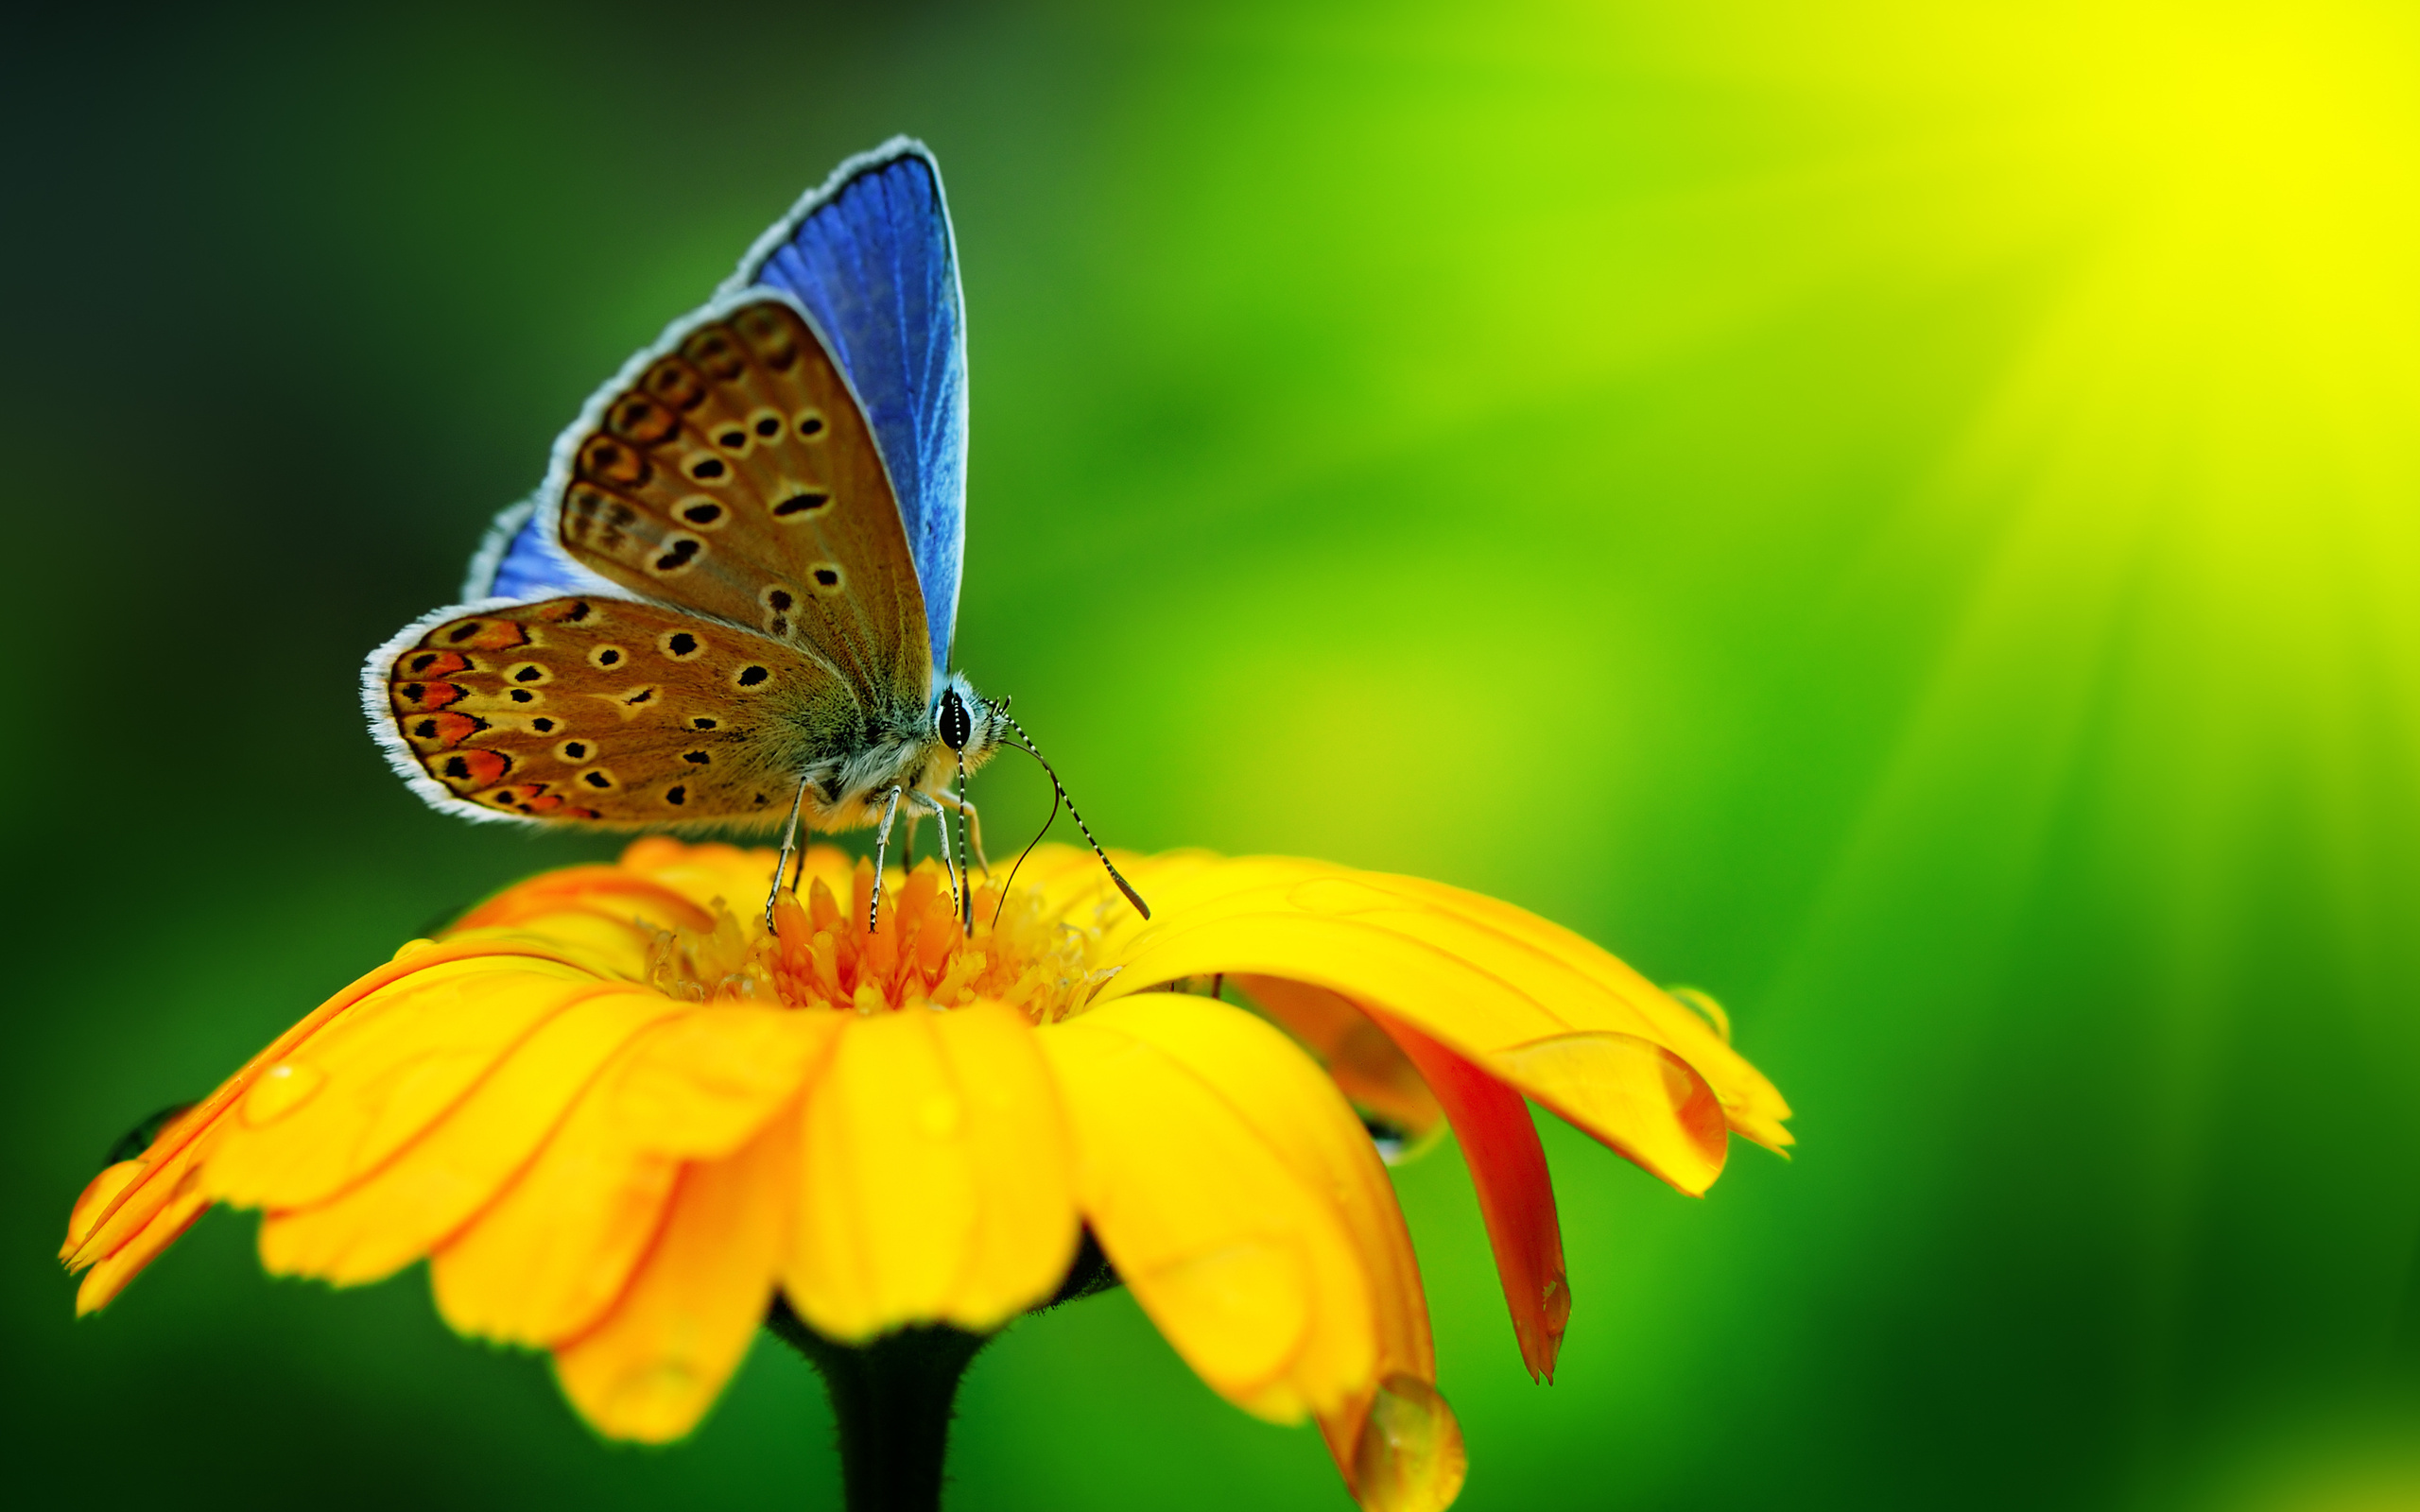 butterfly, Insect, Flower, Drops, Yellow, Green, Bright Wallpaper